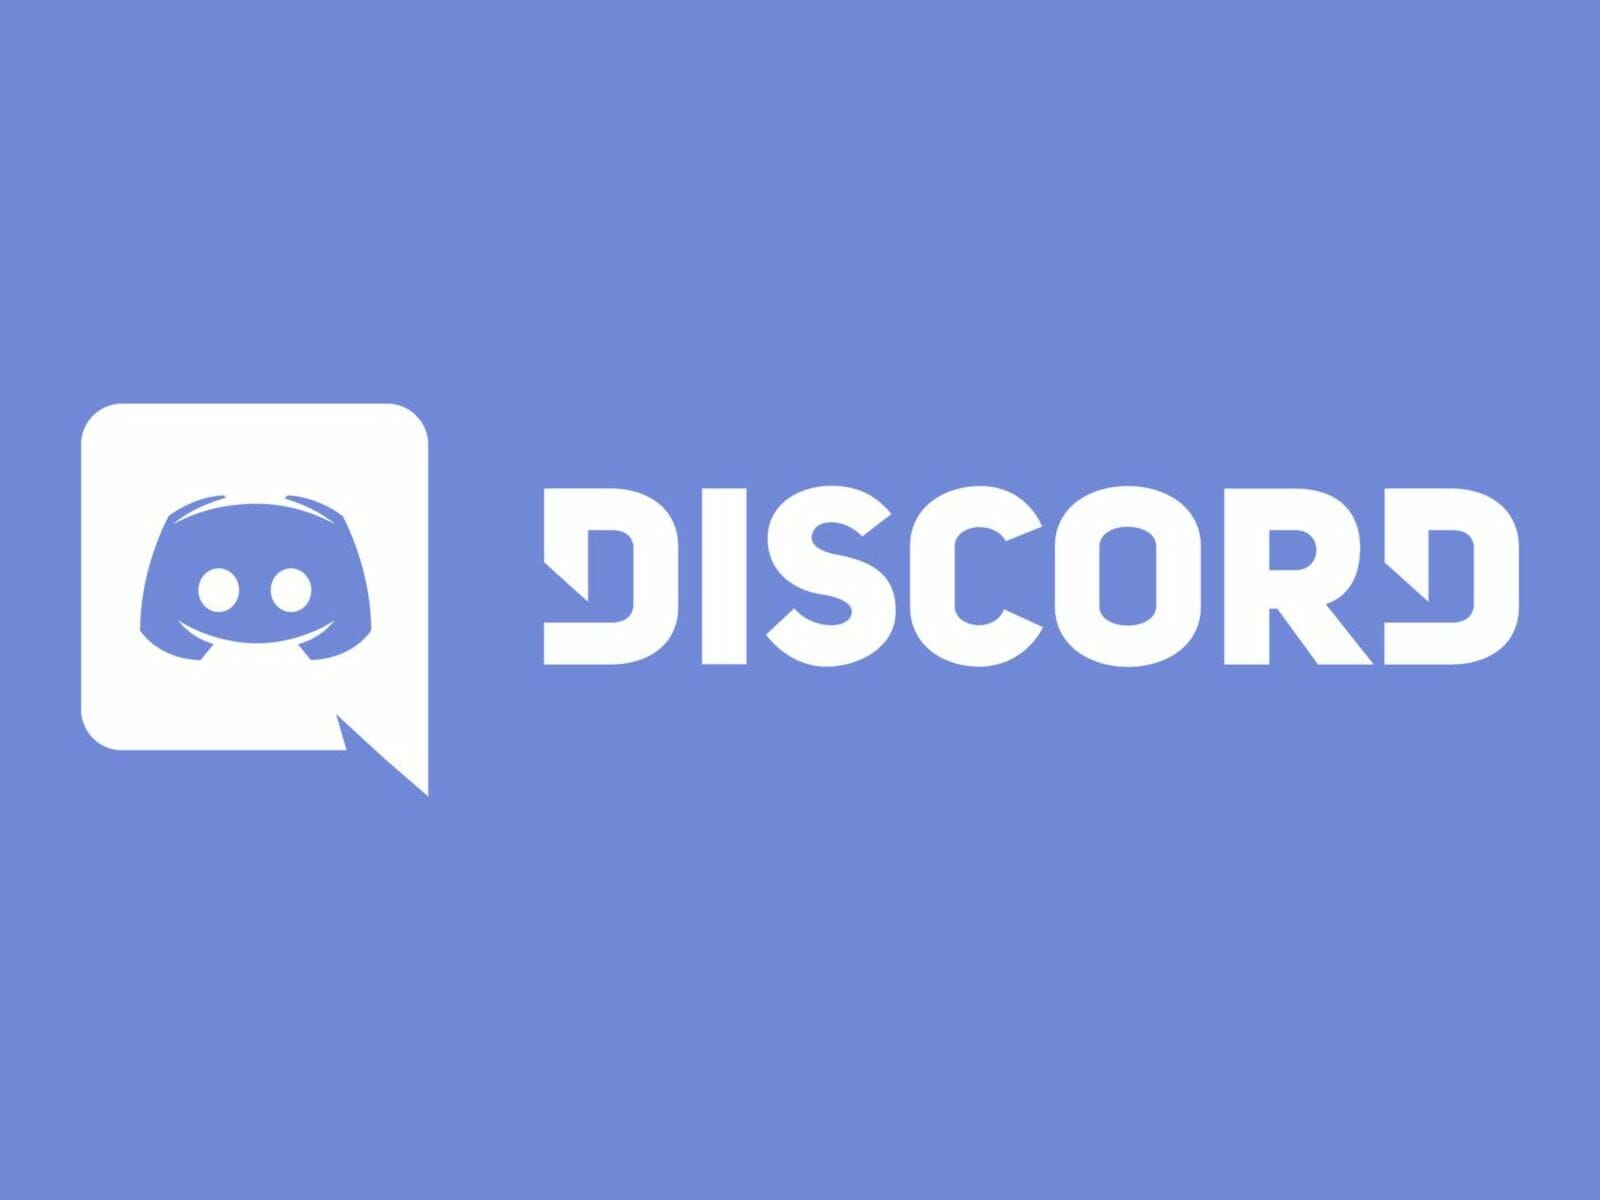 cant download discord on pc